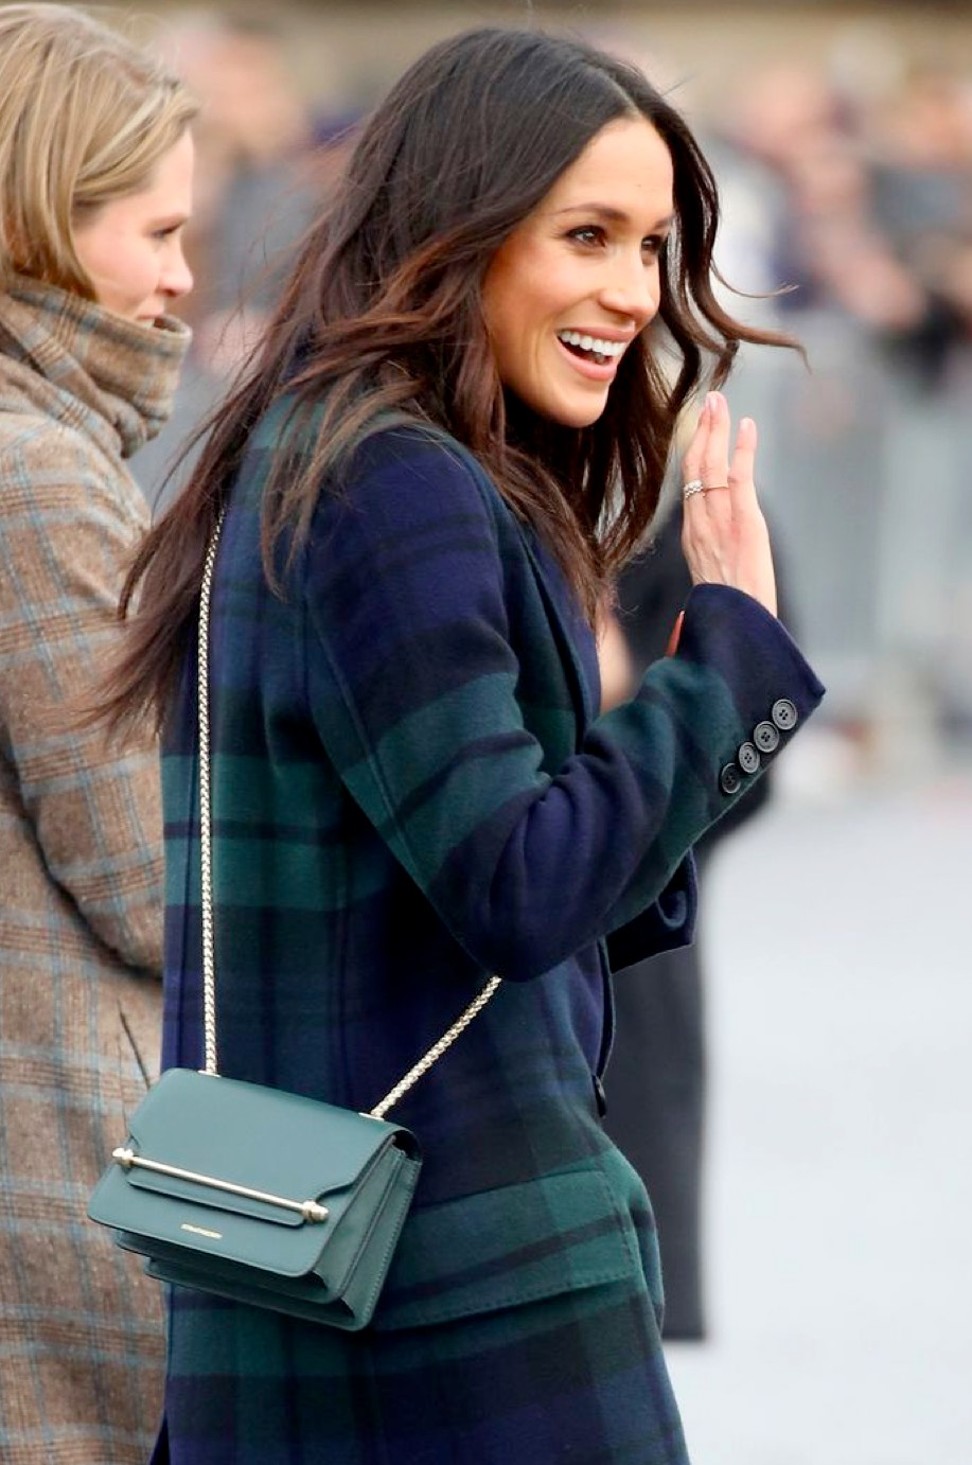 Making of Meghan Markle's Strathberry Bag